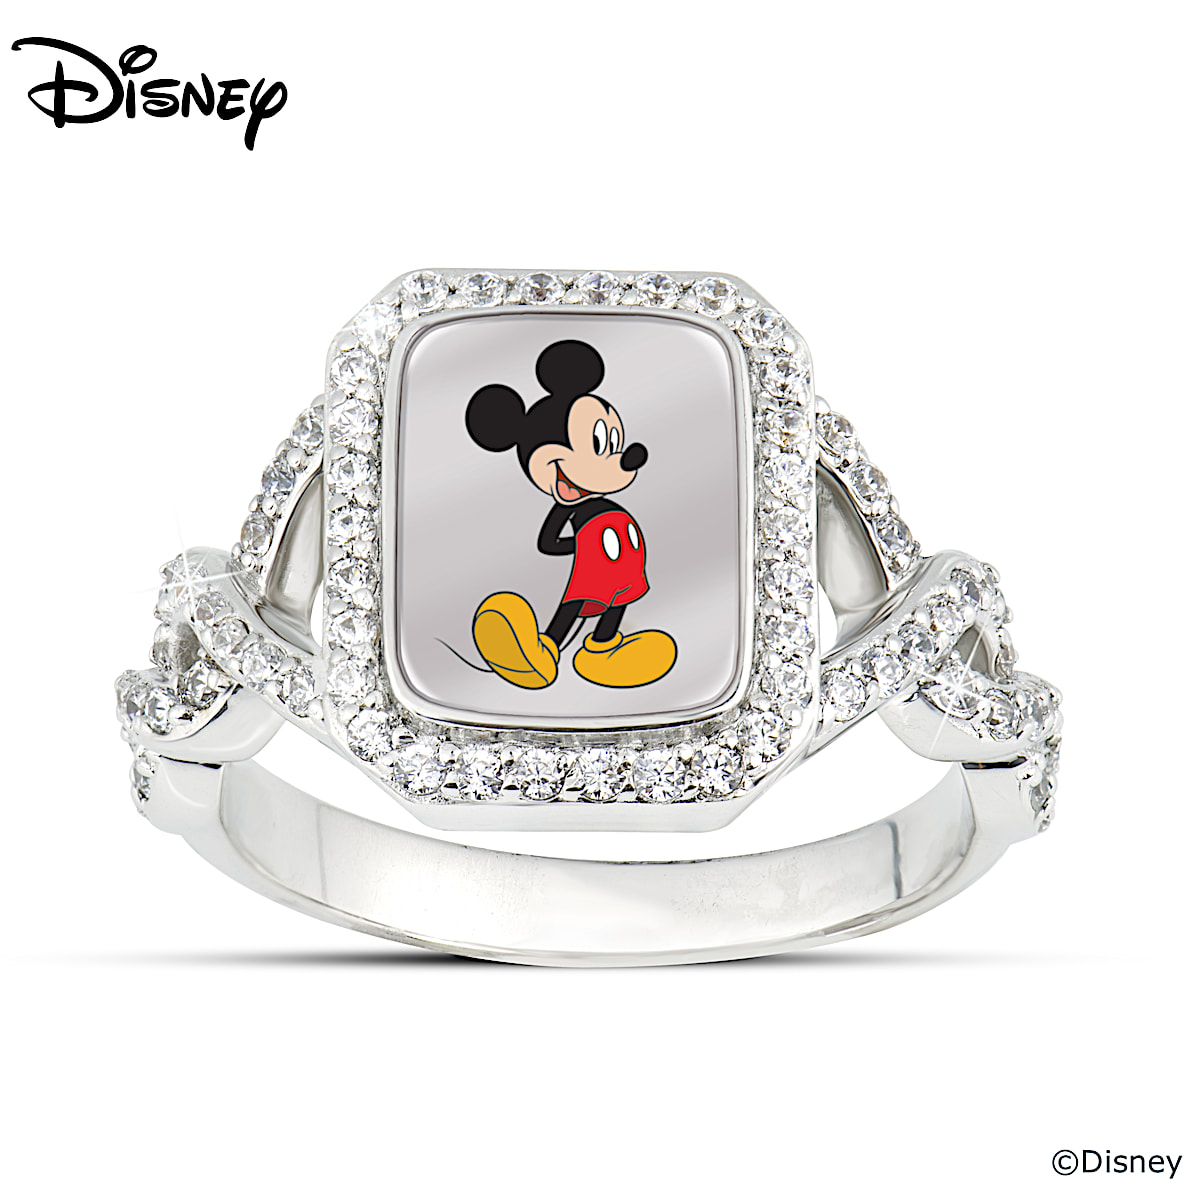 Disney on with The Show Women's Sterling Silver Mickey Mouse Ring Featuring Over 1 Carat of CZ Crystals - Christmas Gift